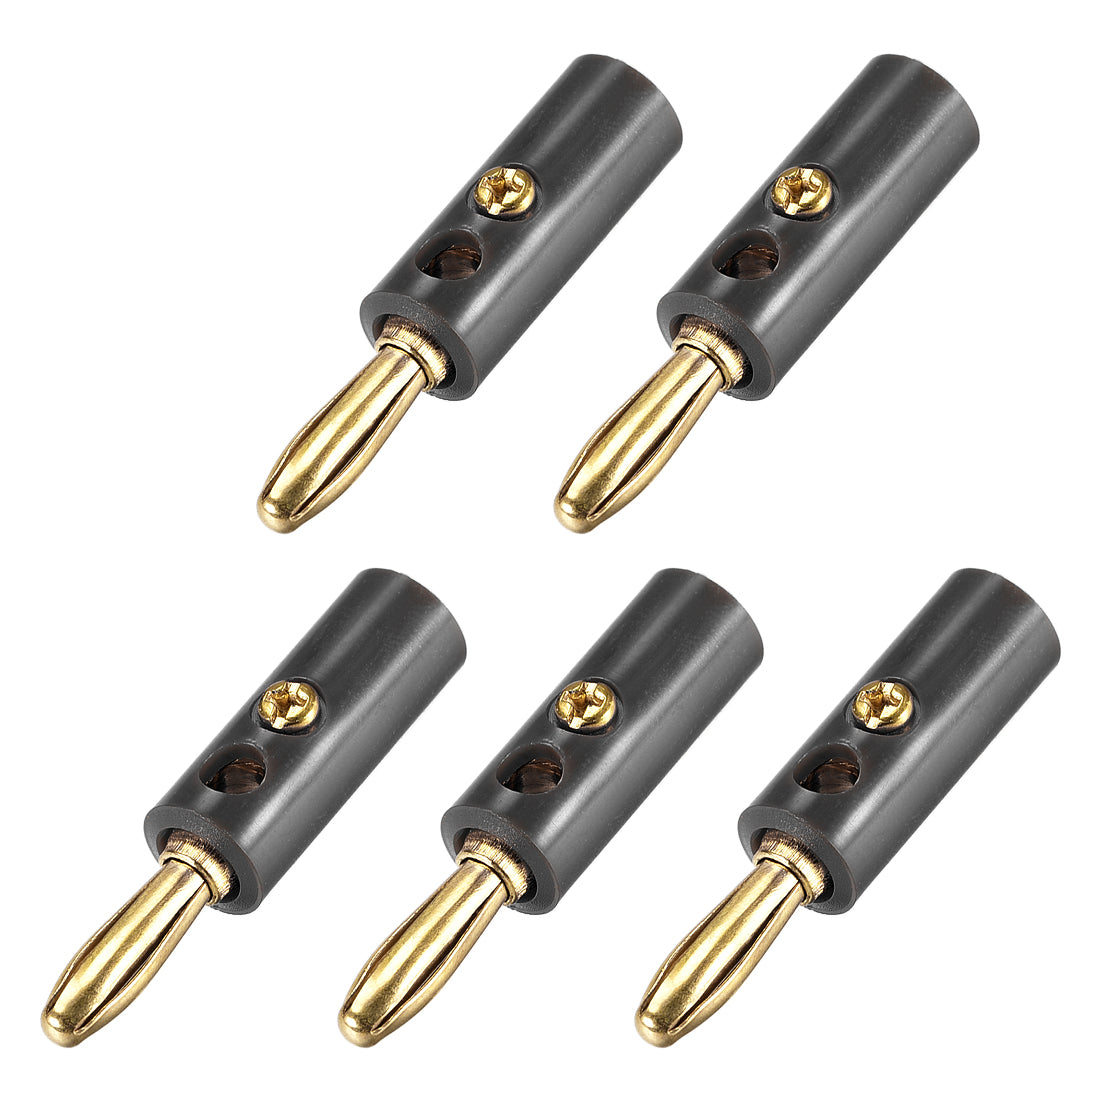 uxcell Uxcell 4mm Banana Speaker Wire Cable Screw Plugs Connectors Gold Black 5pcs Jack Connector